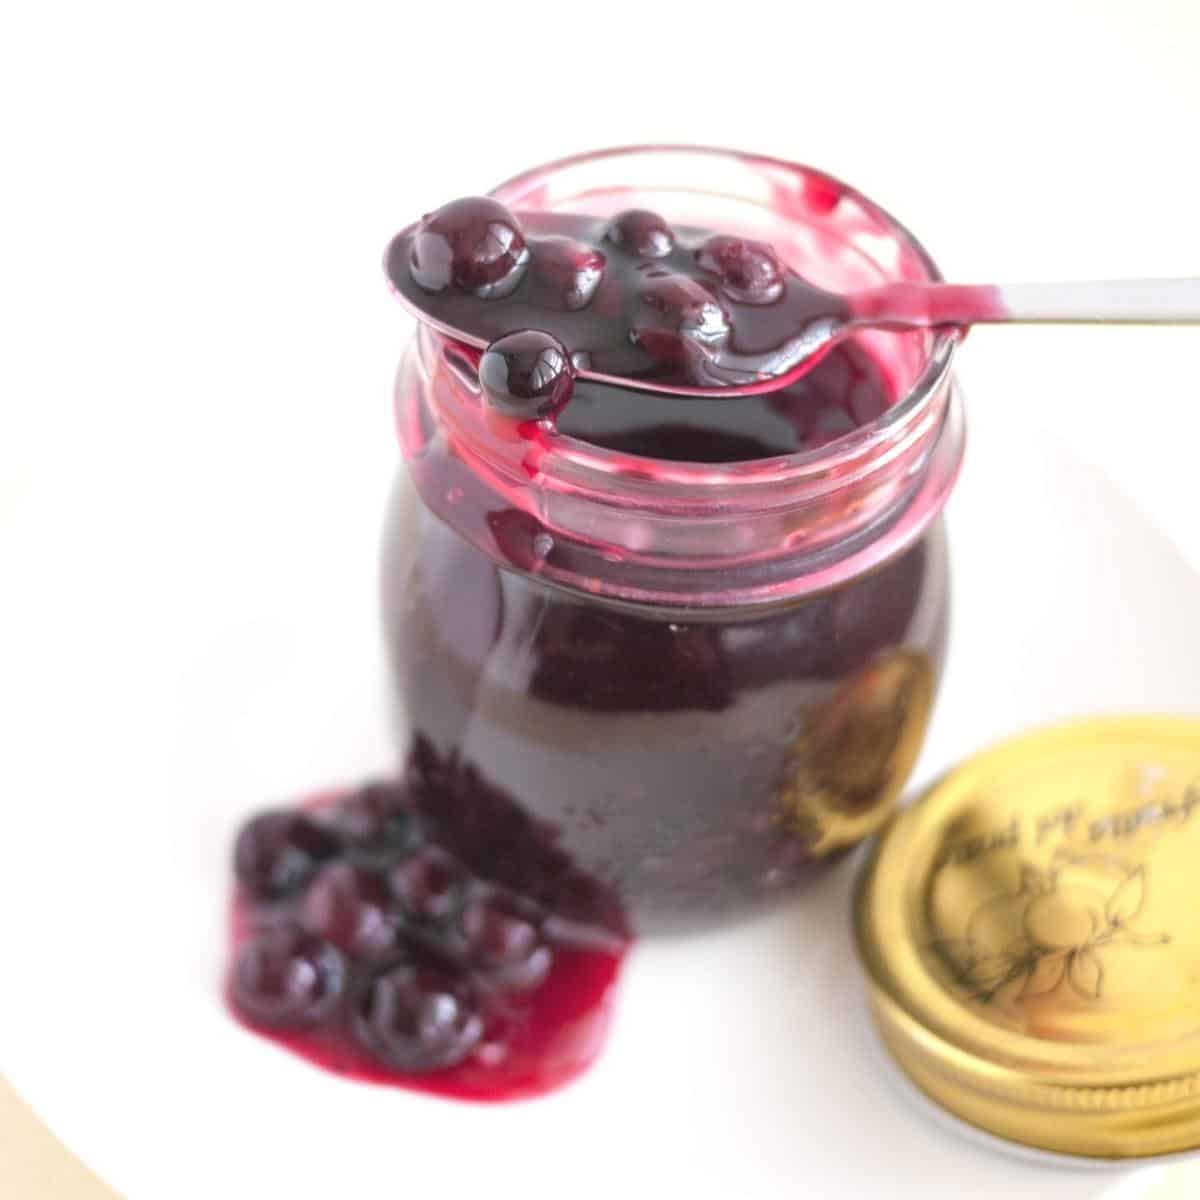 A mason jar with blueberry fruit filling.